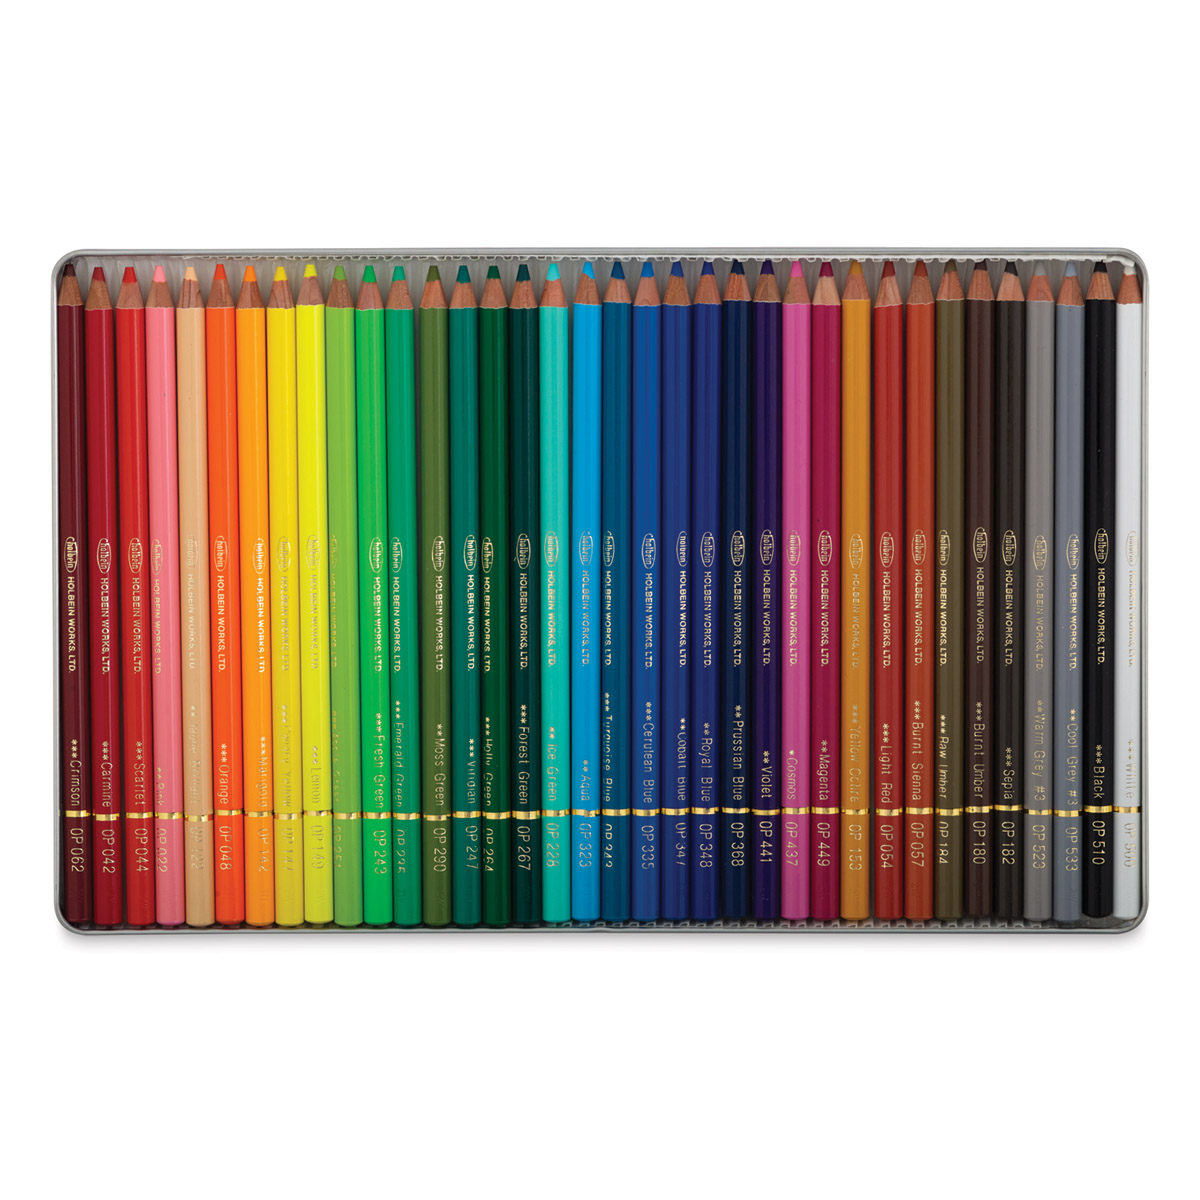 Taking a Look at Holbein Colored Pencils